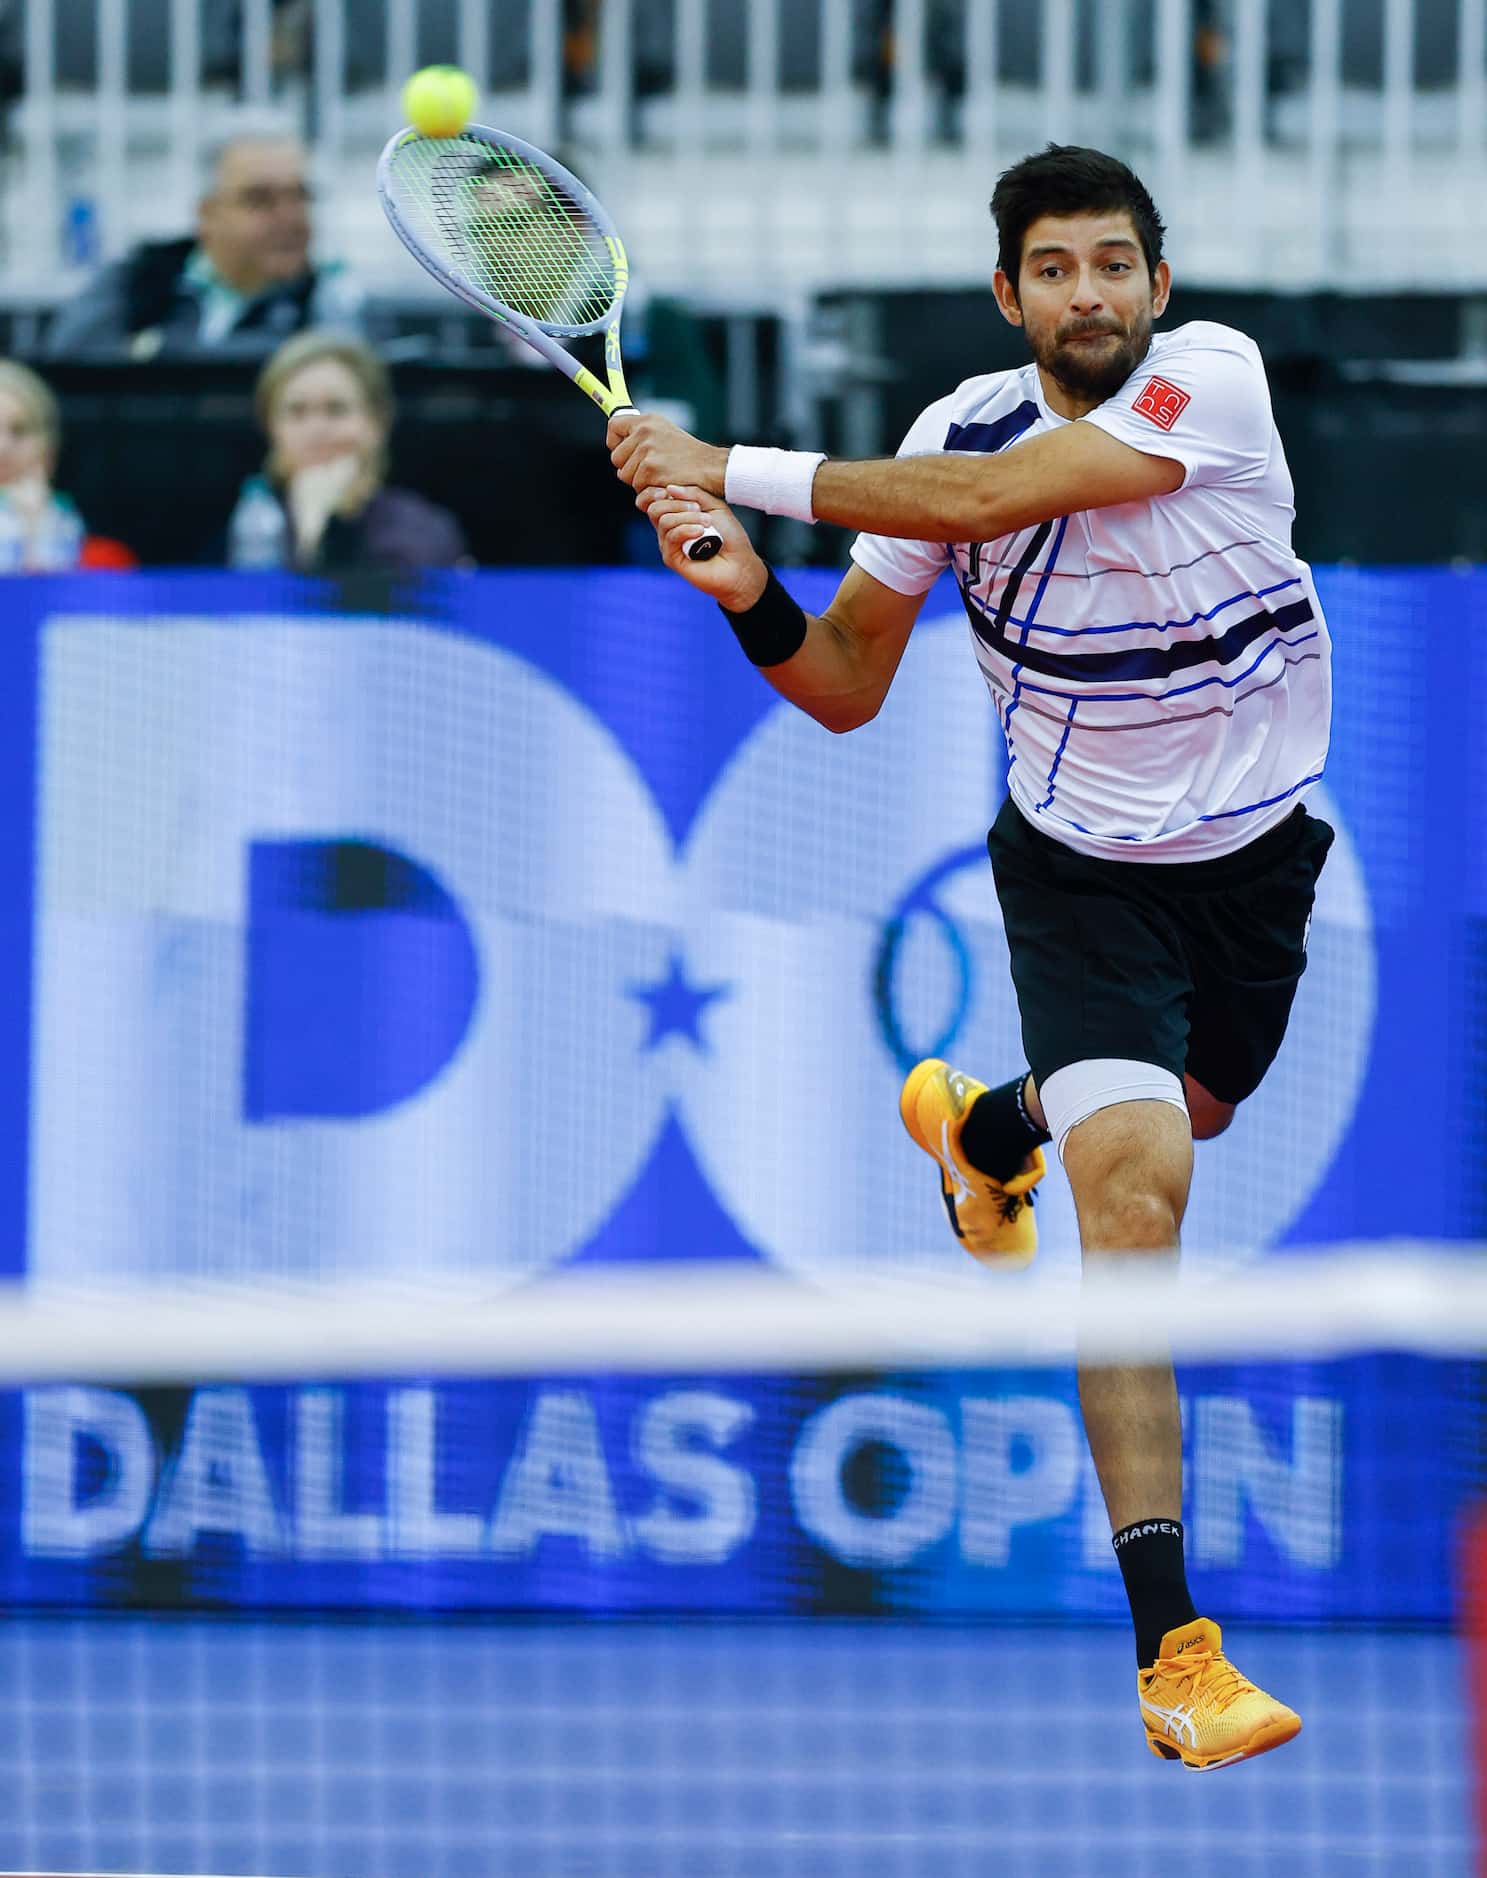 Marcelo Arevalo returns the ball during the doubles final of the ATP Dallas Open against...